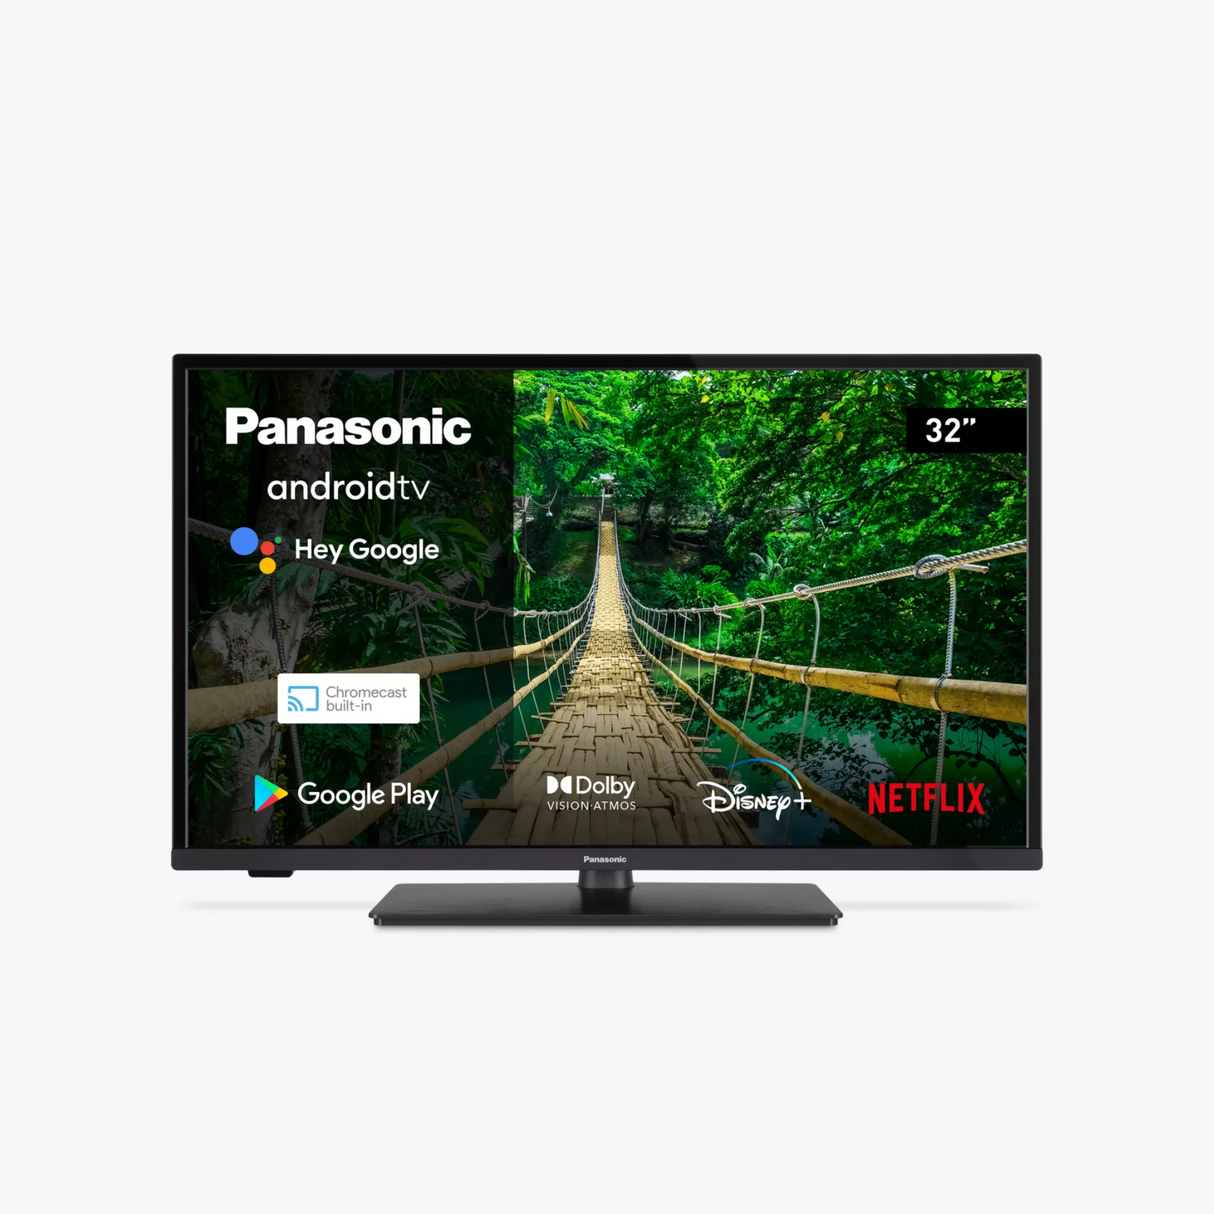 Panasonic TX-32MS490B 32" LED HDR Full HD 1080p Smart Android TV with Freeview Play